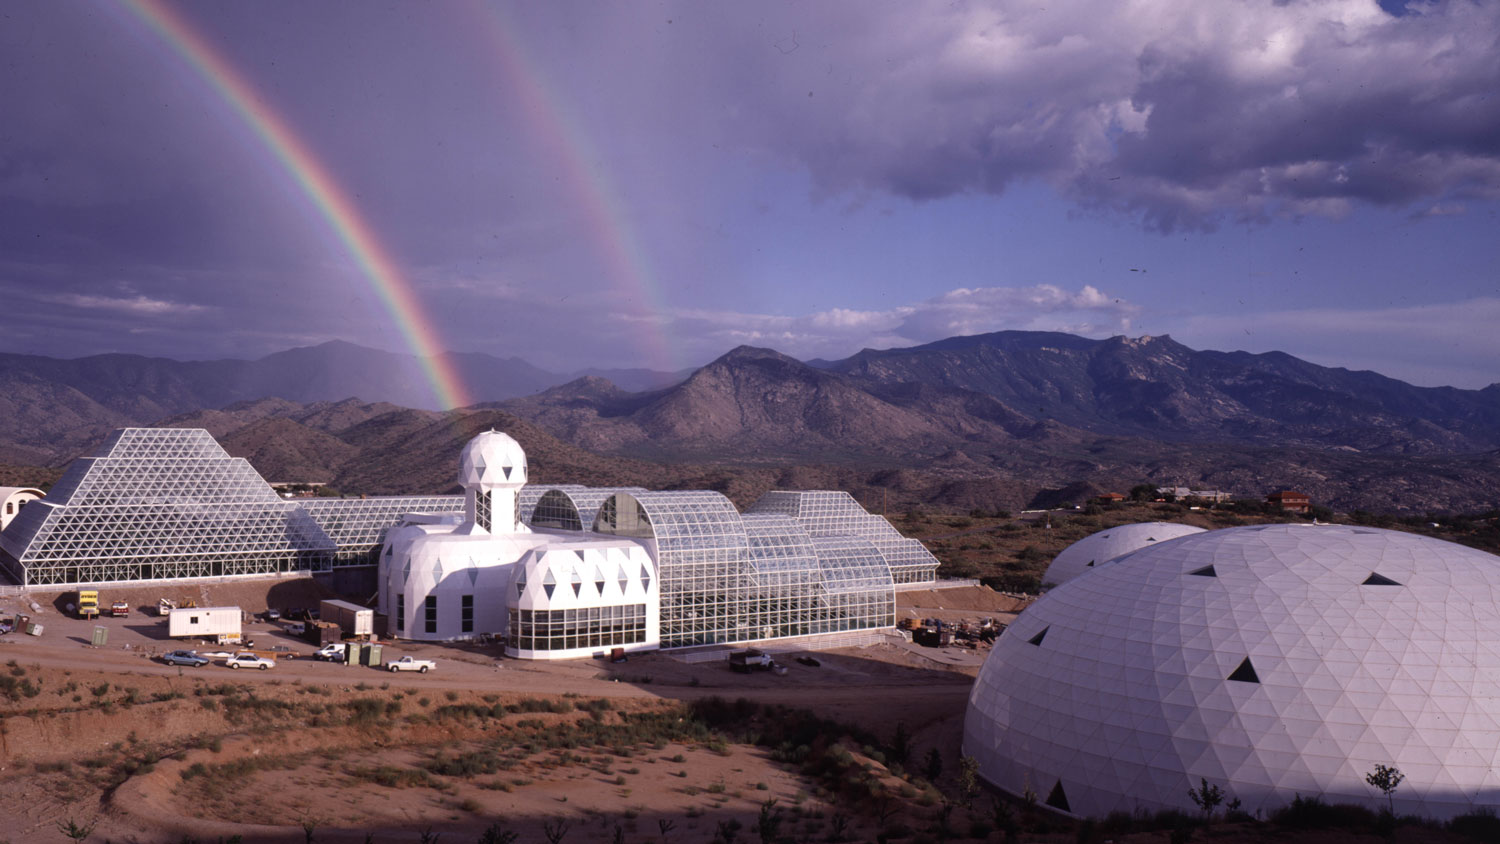 A futuristic town of biospheres in a desert plain with a double rainbow in the sky. 